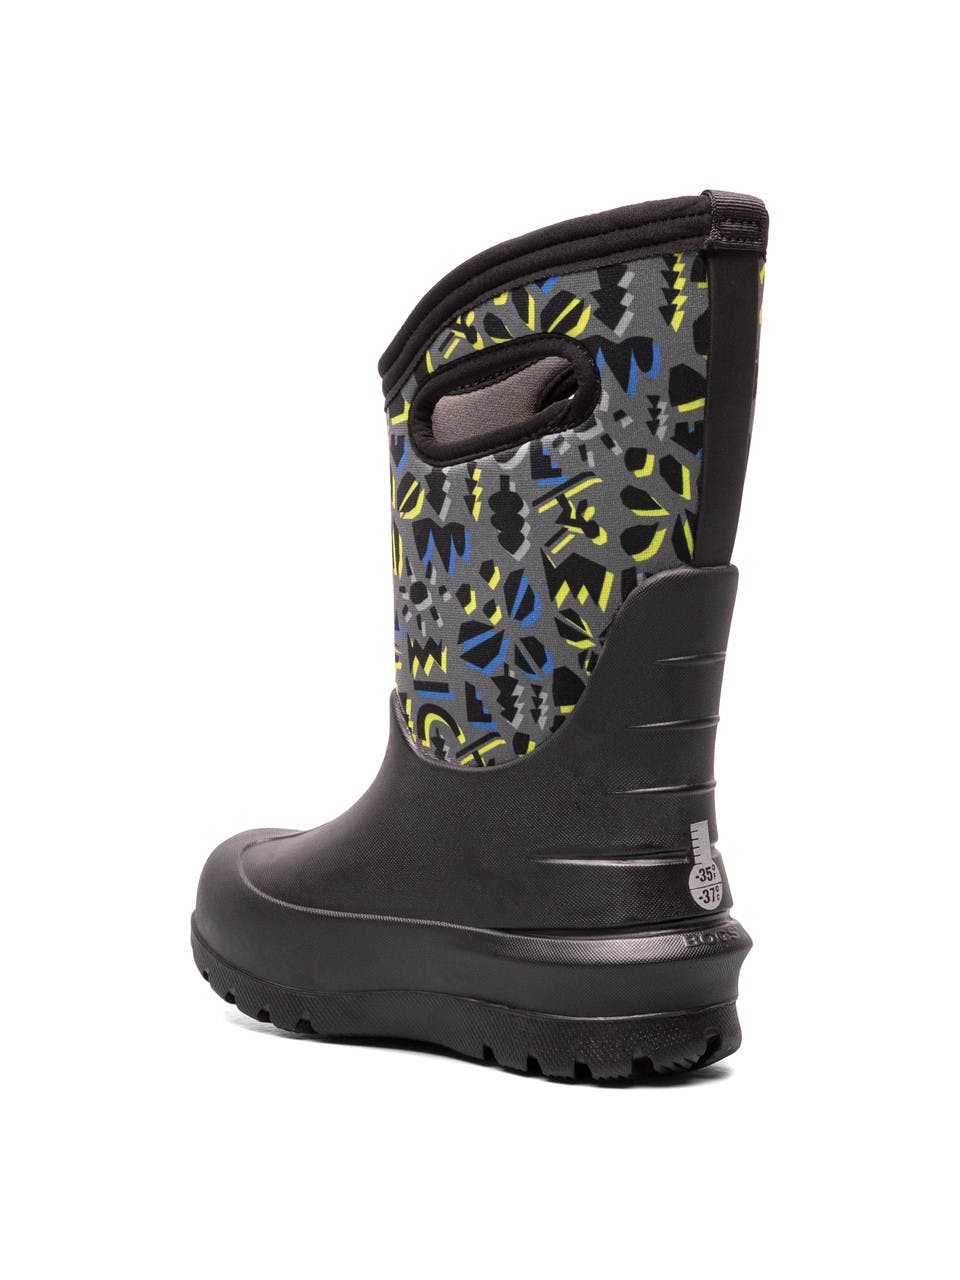 Neo Classic Waterproof Insulated Boots Adventure